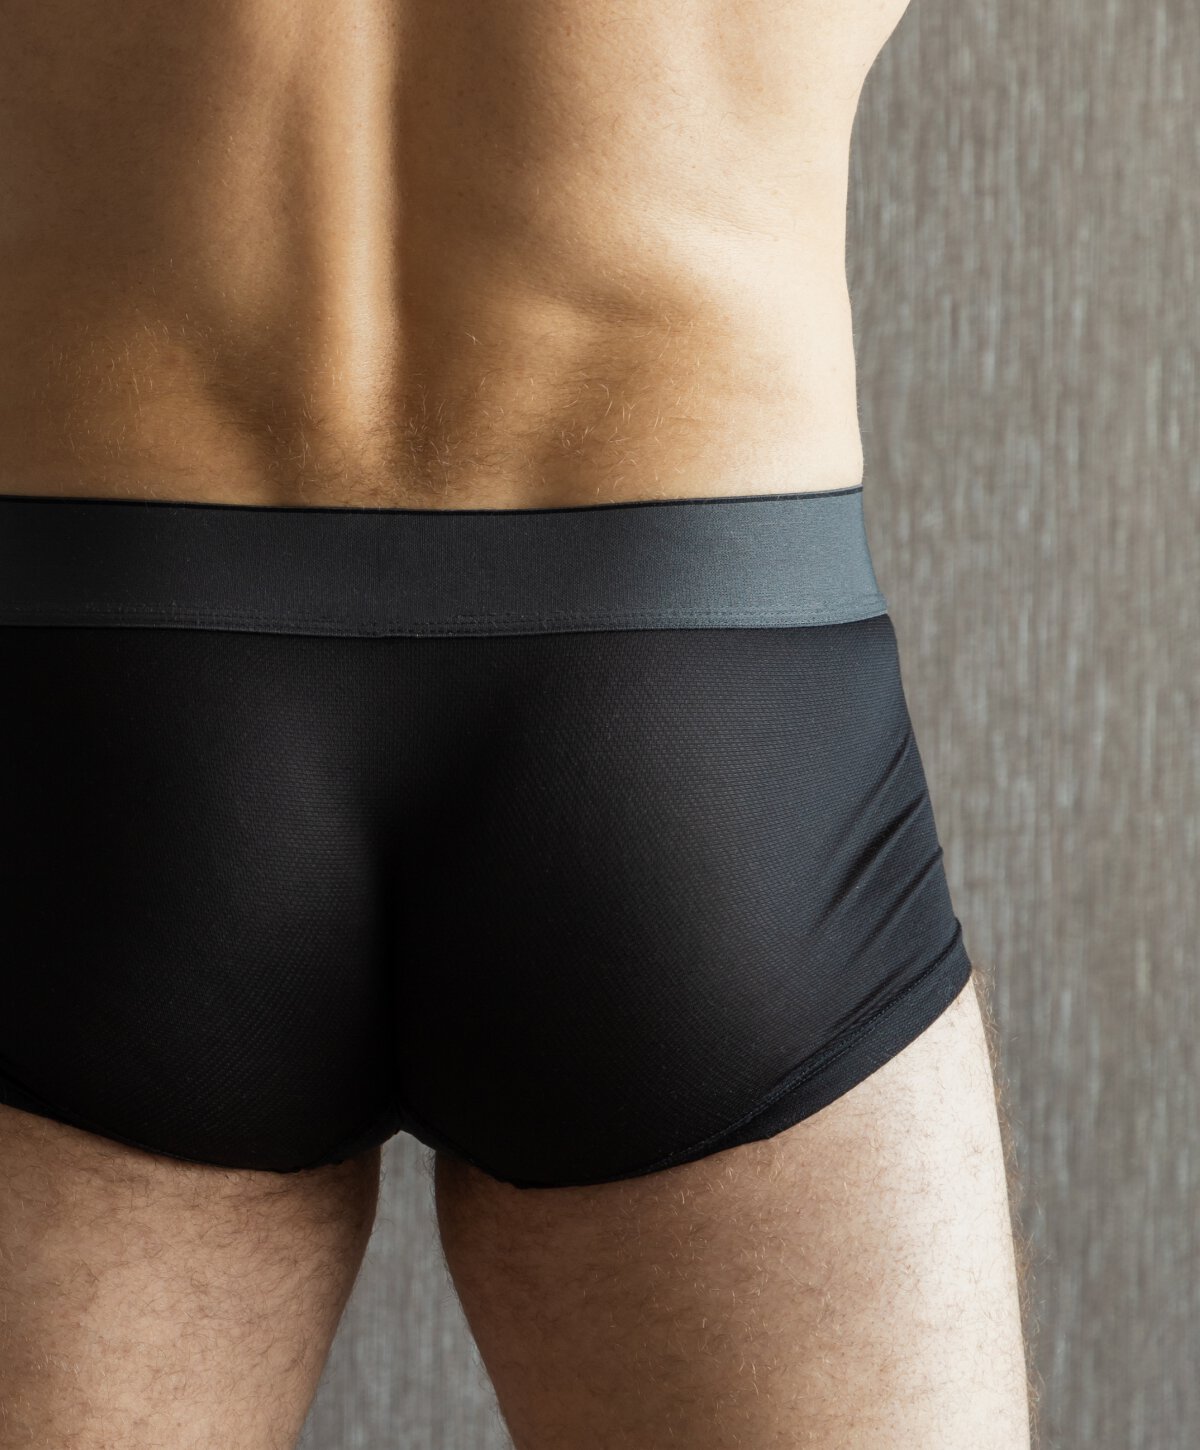 Chicago buttocks reshaping model with black shorts